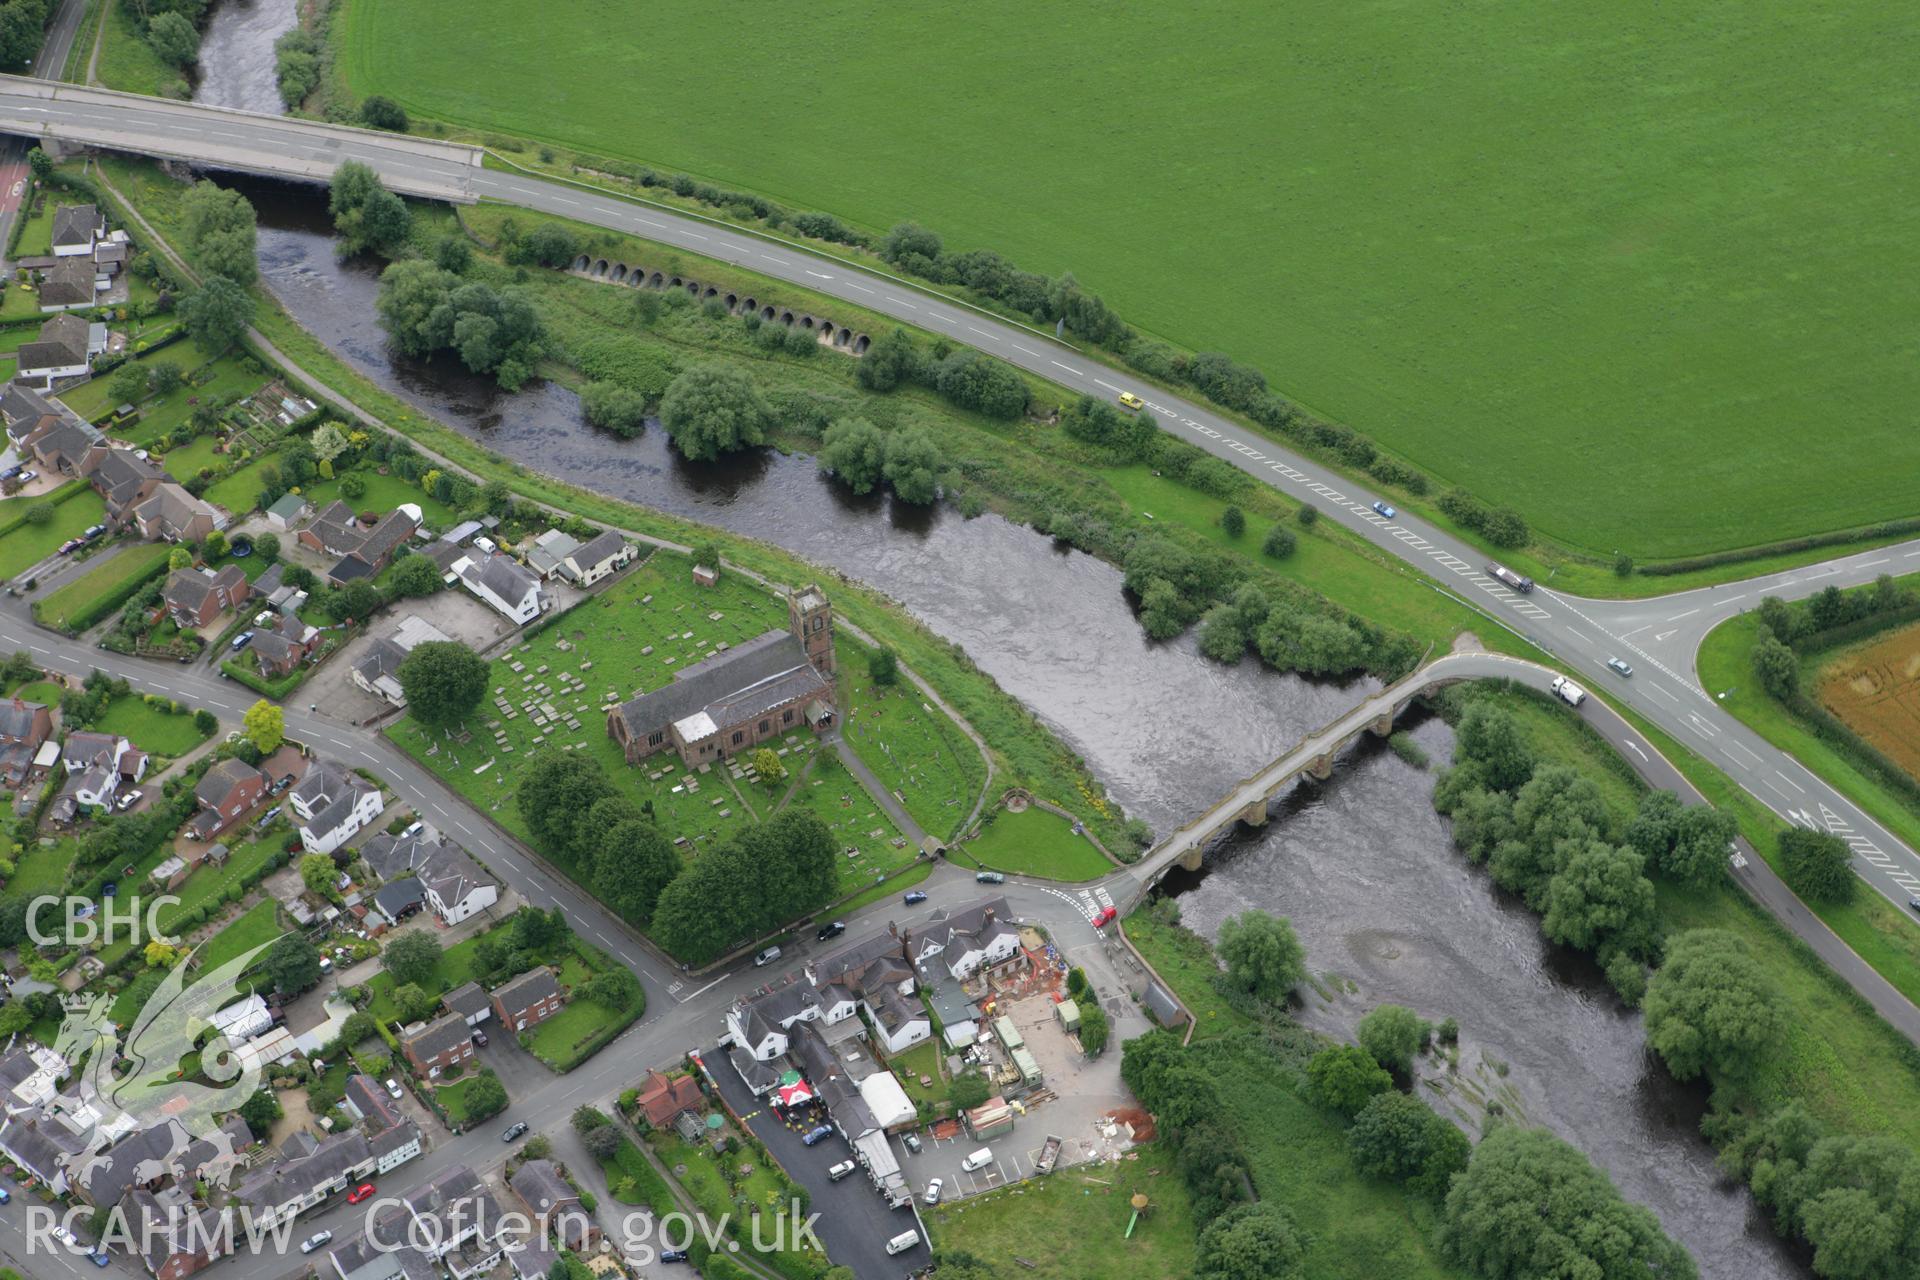 RCAHMW colour oblique aerial photograph of Dee Bridge, Bangor-Is-y-Coed. Taken on 24 July 2007 by Toby Driver